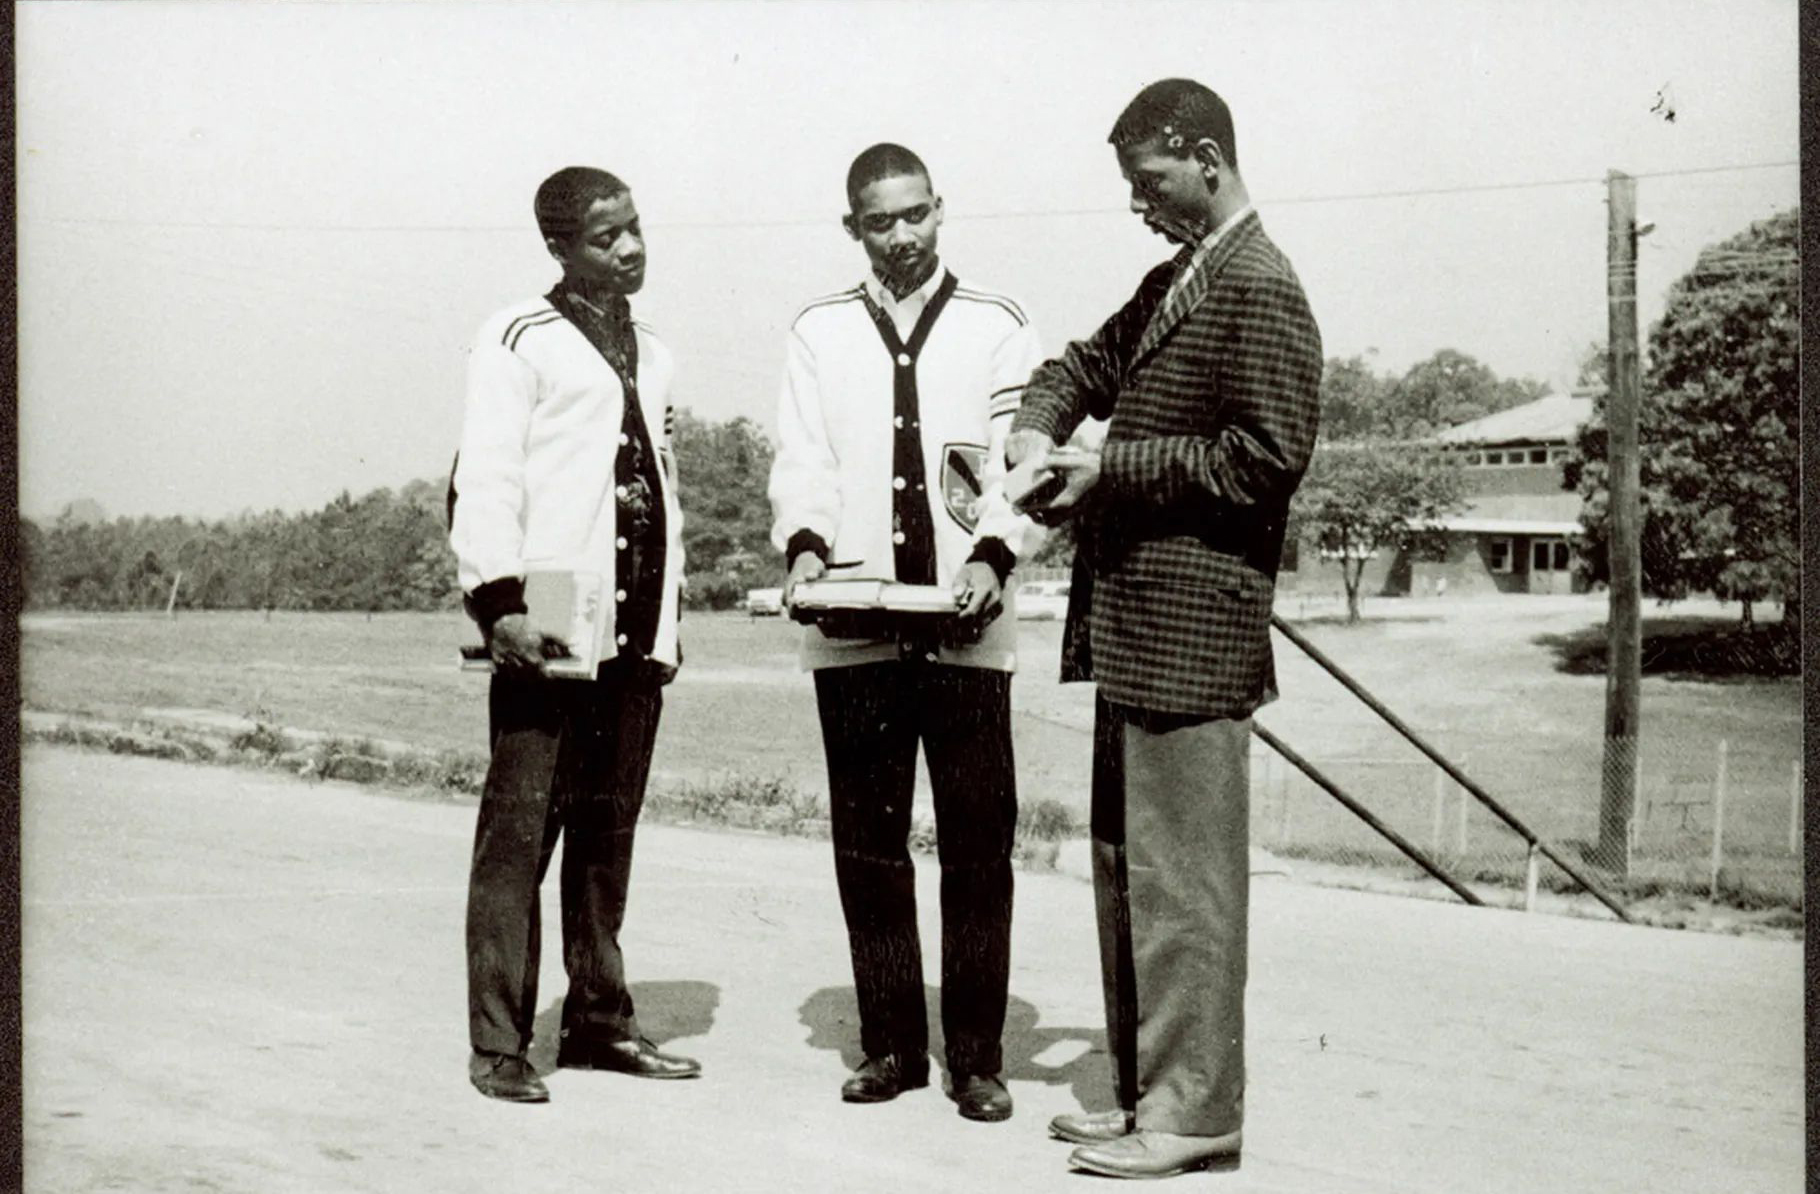 Ford C. Greene, Ralph A. Long Jr., and Lawrence Williams